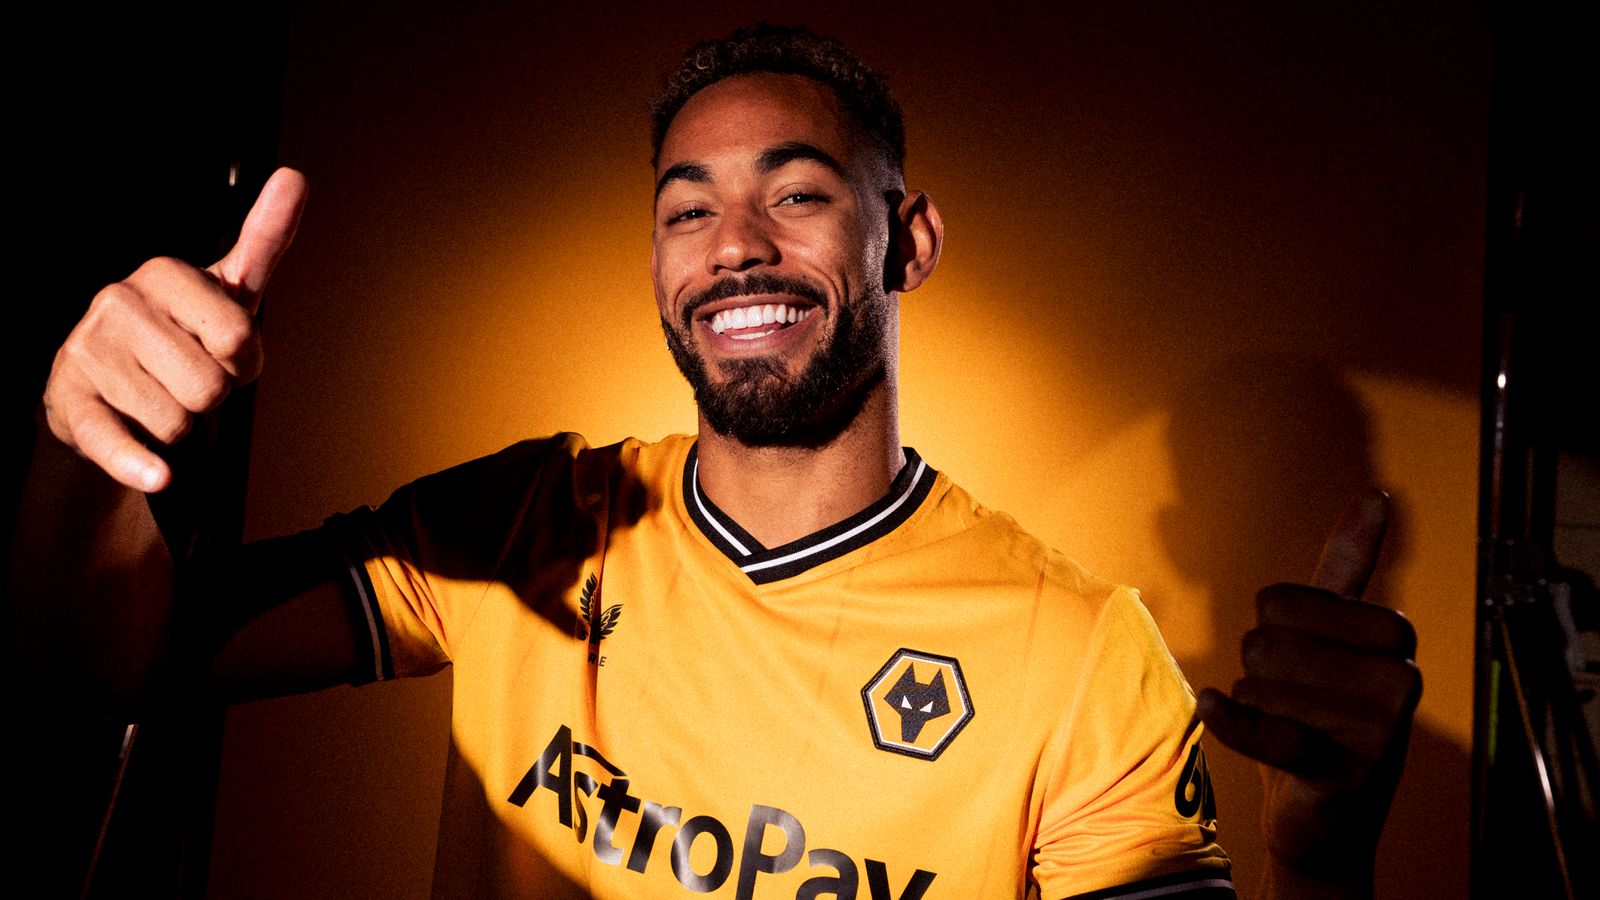 Matheus Cunha of Wolverhampton Wanderers poses for a portrait in the 2023/24 Home Kit during media access day at Molineux on August 03, 2023 in Wolverhampton, England.